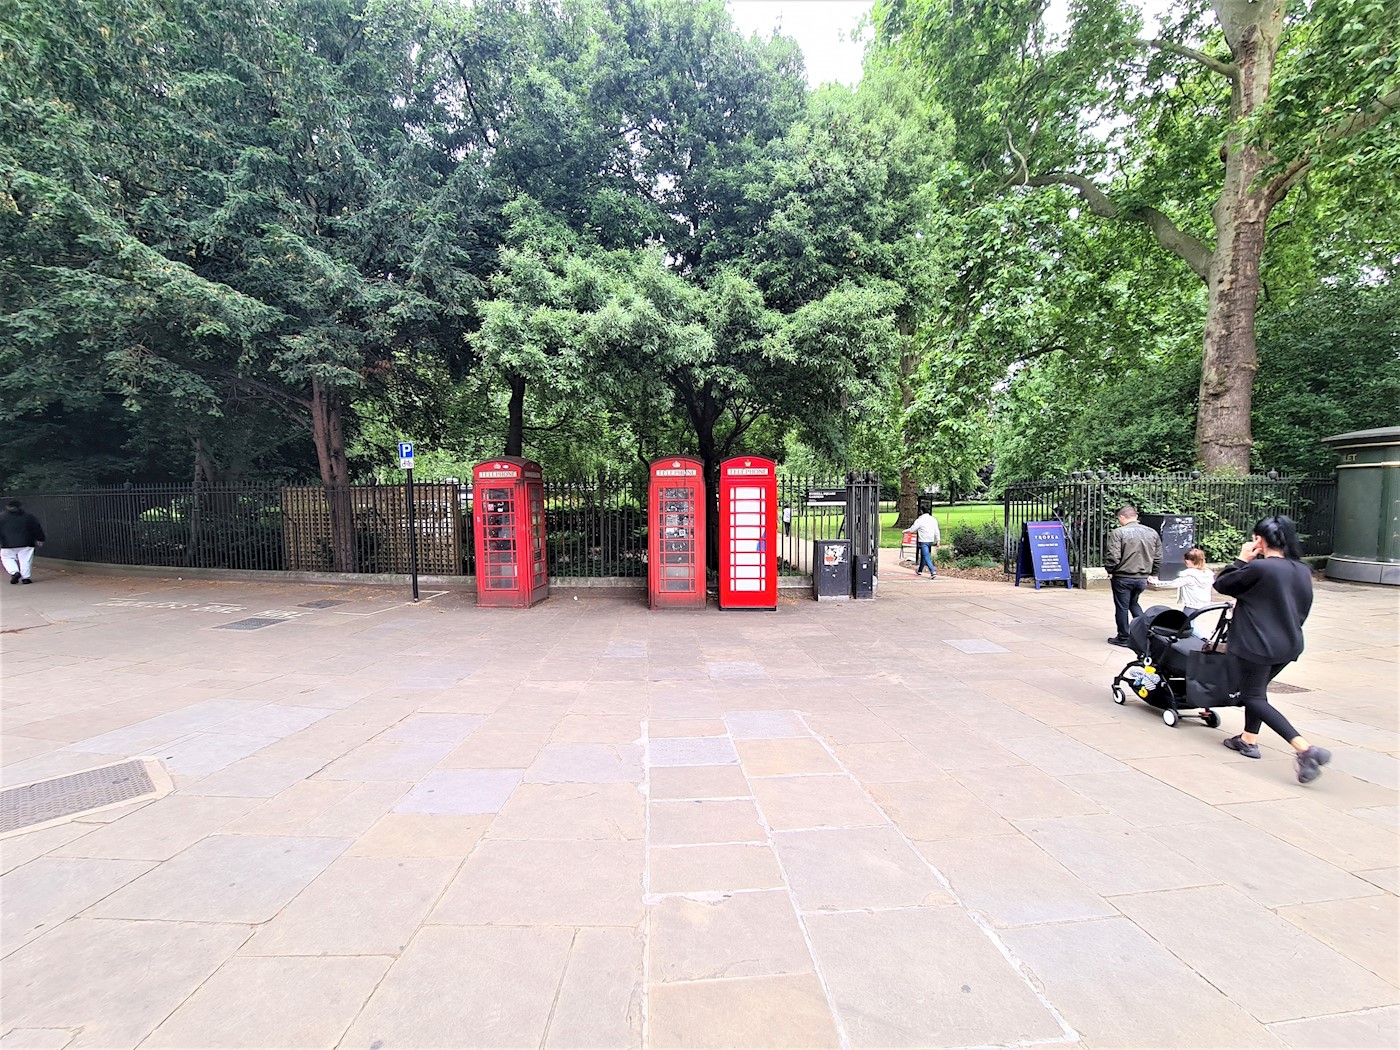 Telephone Kiosk, North Russell Square/Woburn Place, Camden, WC1B 5EH 1/2